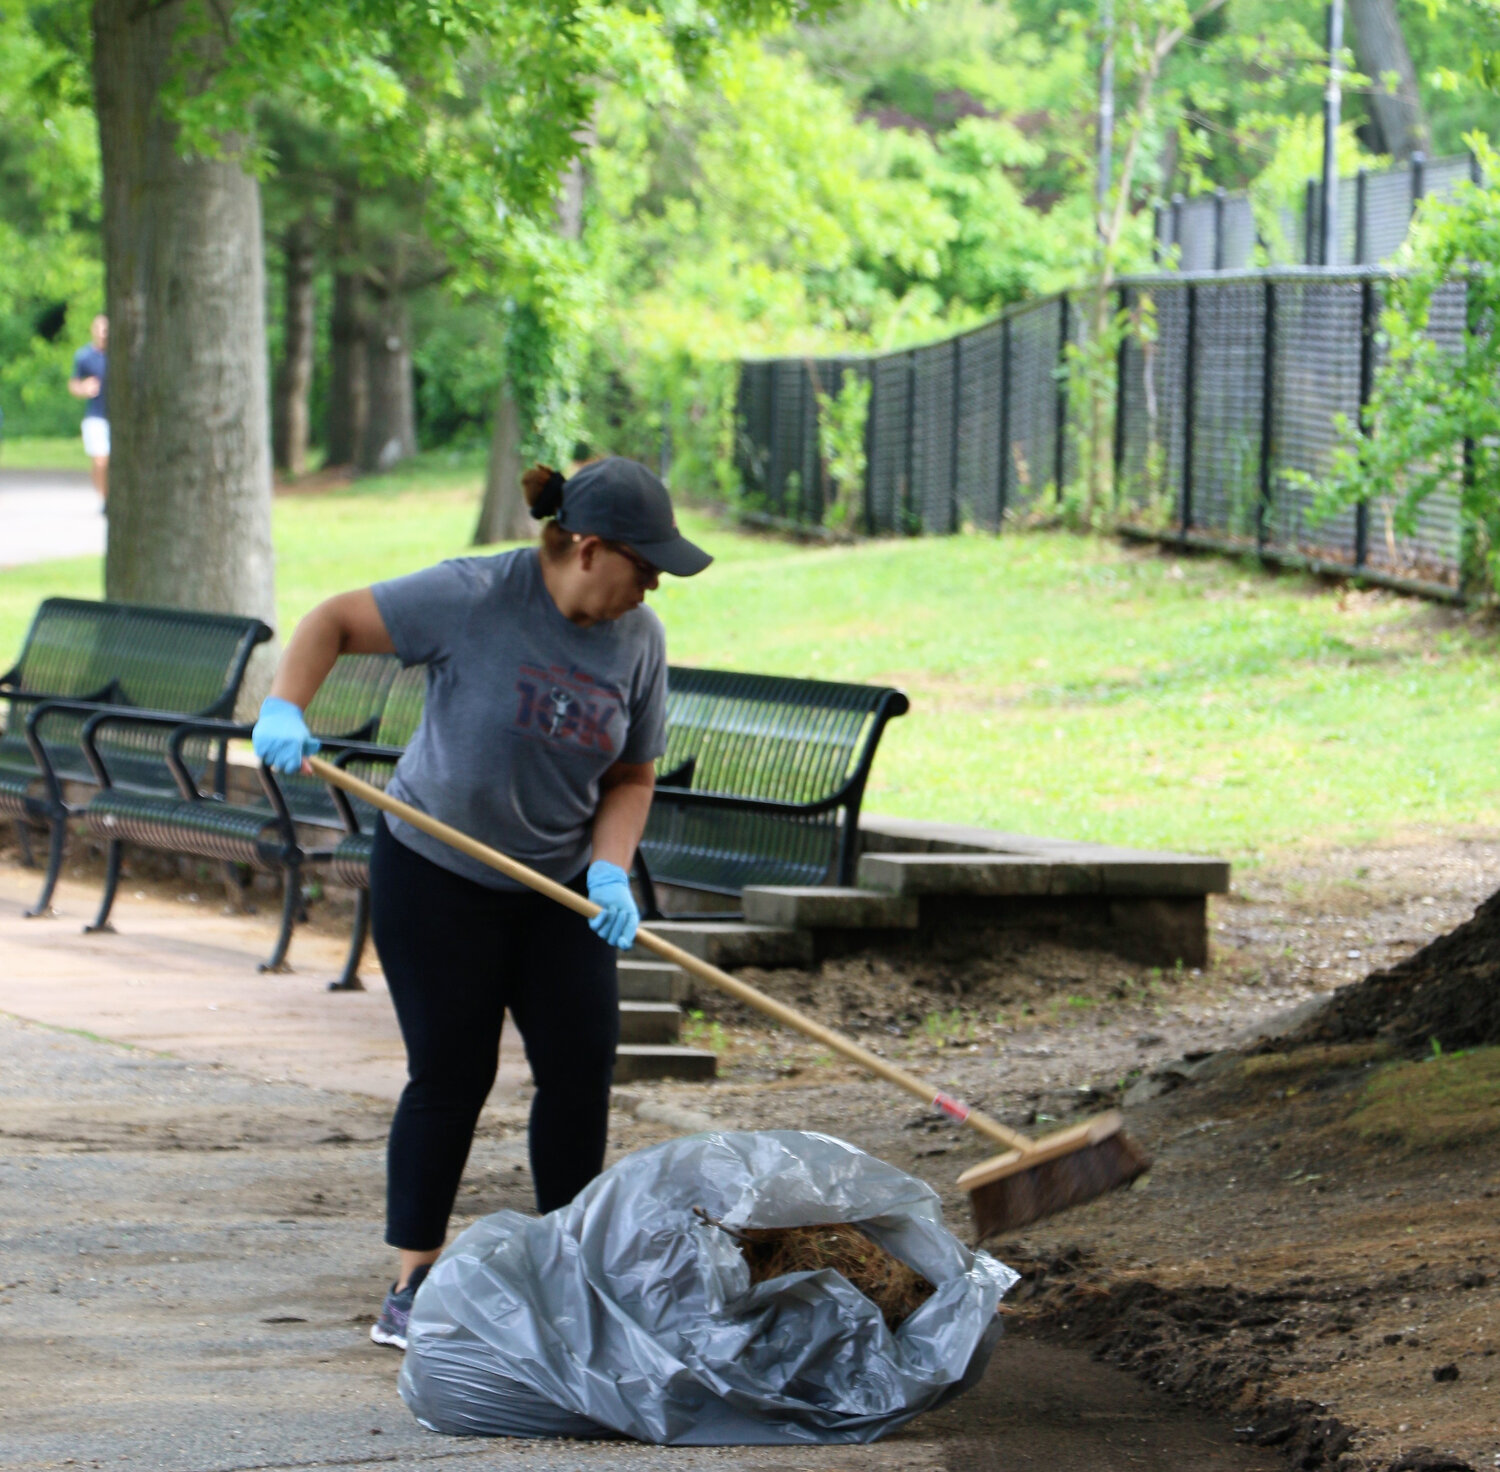 Merceds Robles helps clean Halls Pond Park in time for summer.